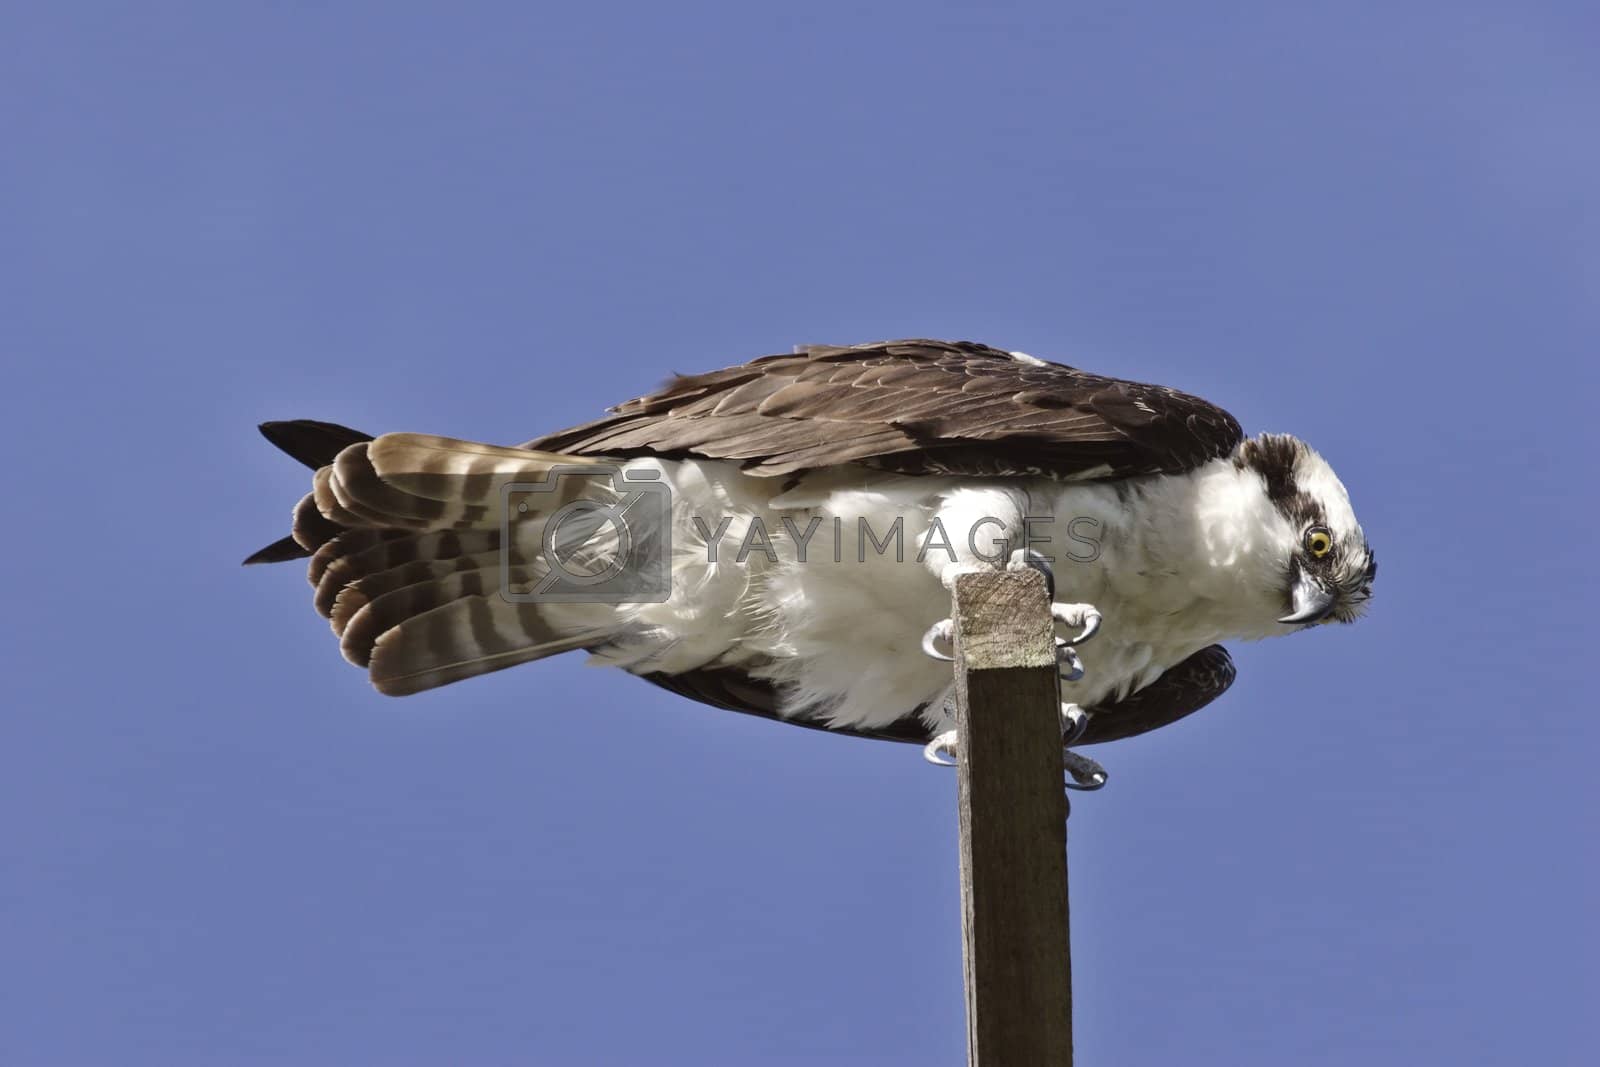 Royalty free image of Osprey perched on roadside post by pictureguy